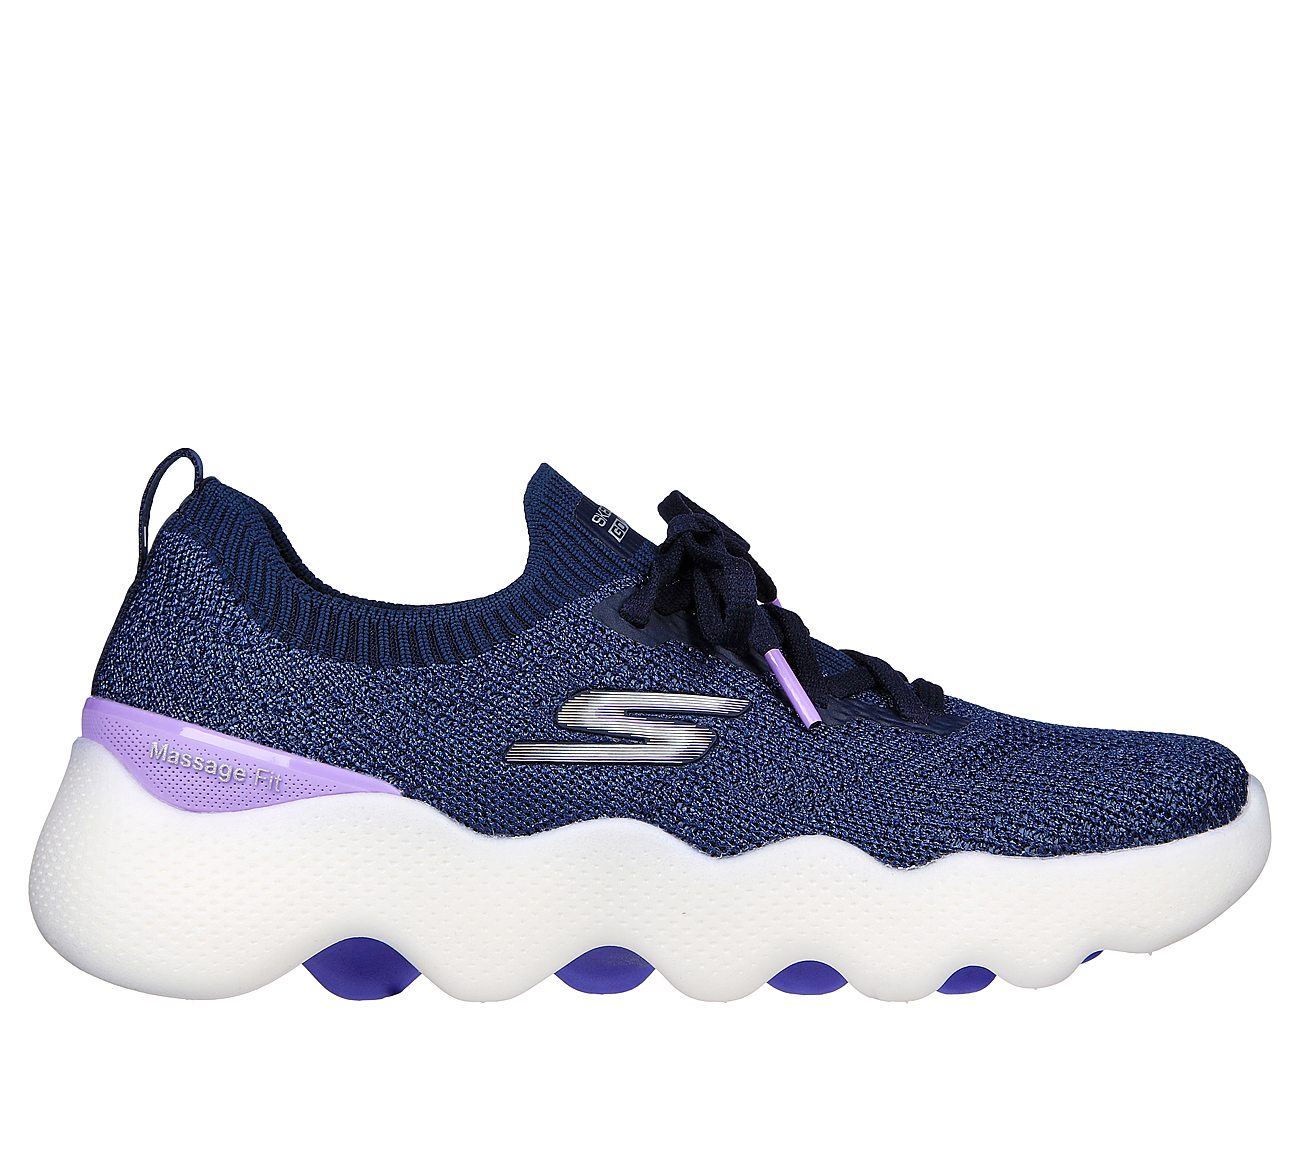 GO WALK MASSAGE FIT - UPSURGE, NAVY/LAVENDER Footwear Lateral View